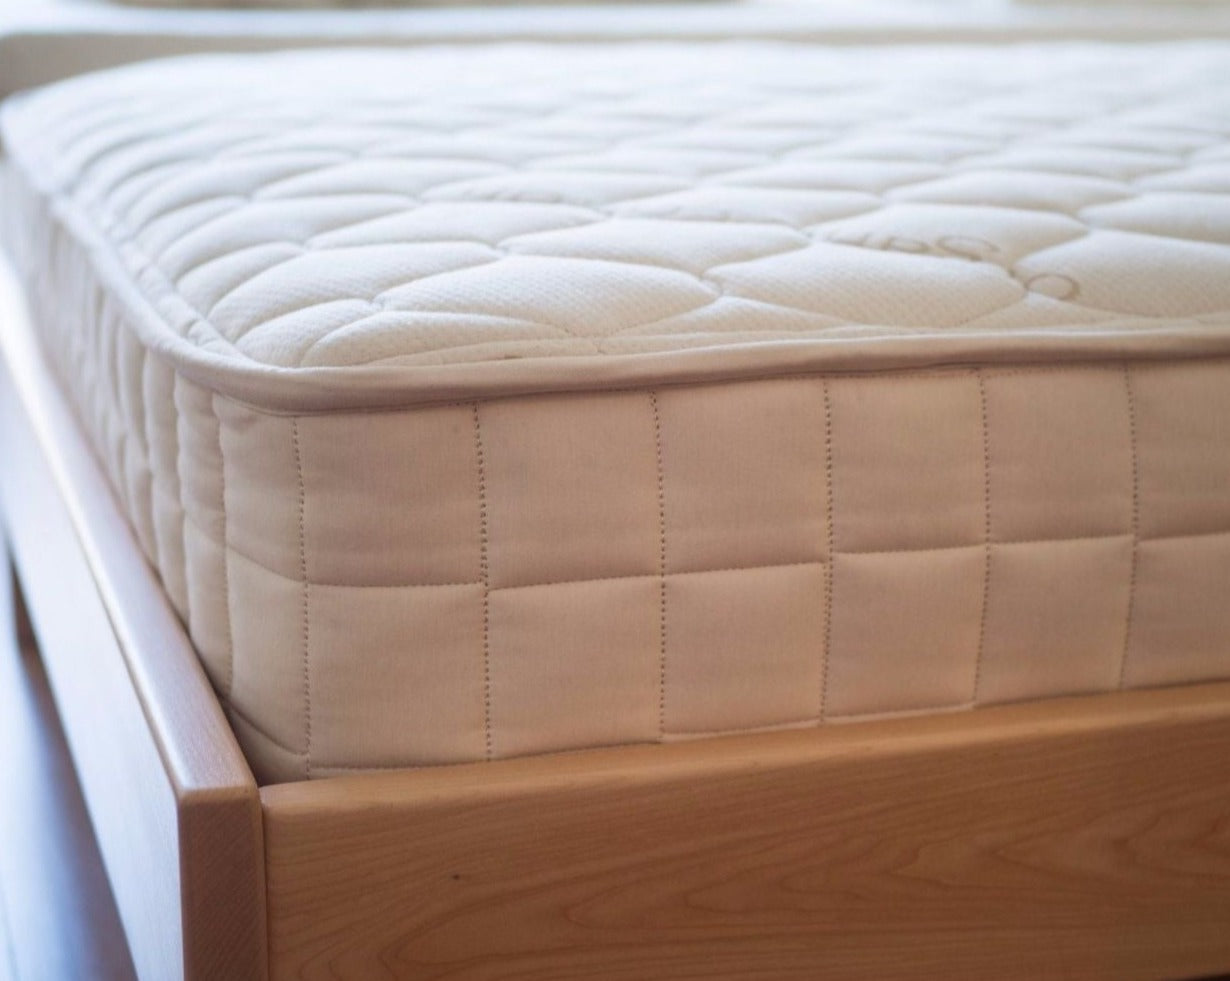 The Verse - Firm support organic Naturepedic mattress available at Resthouse Sleep Solutions